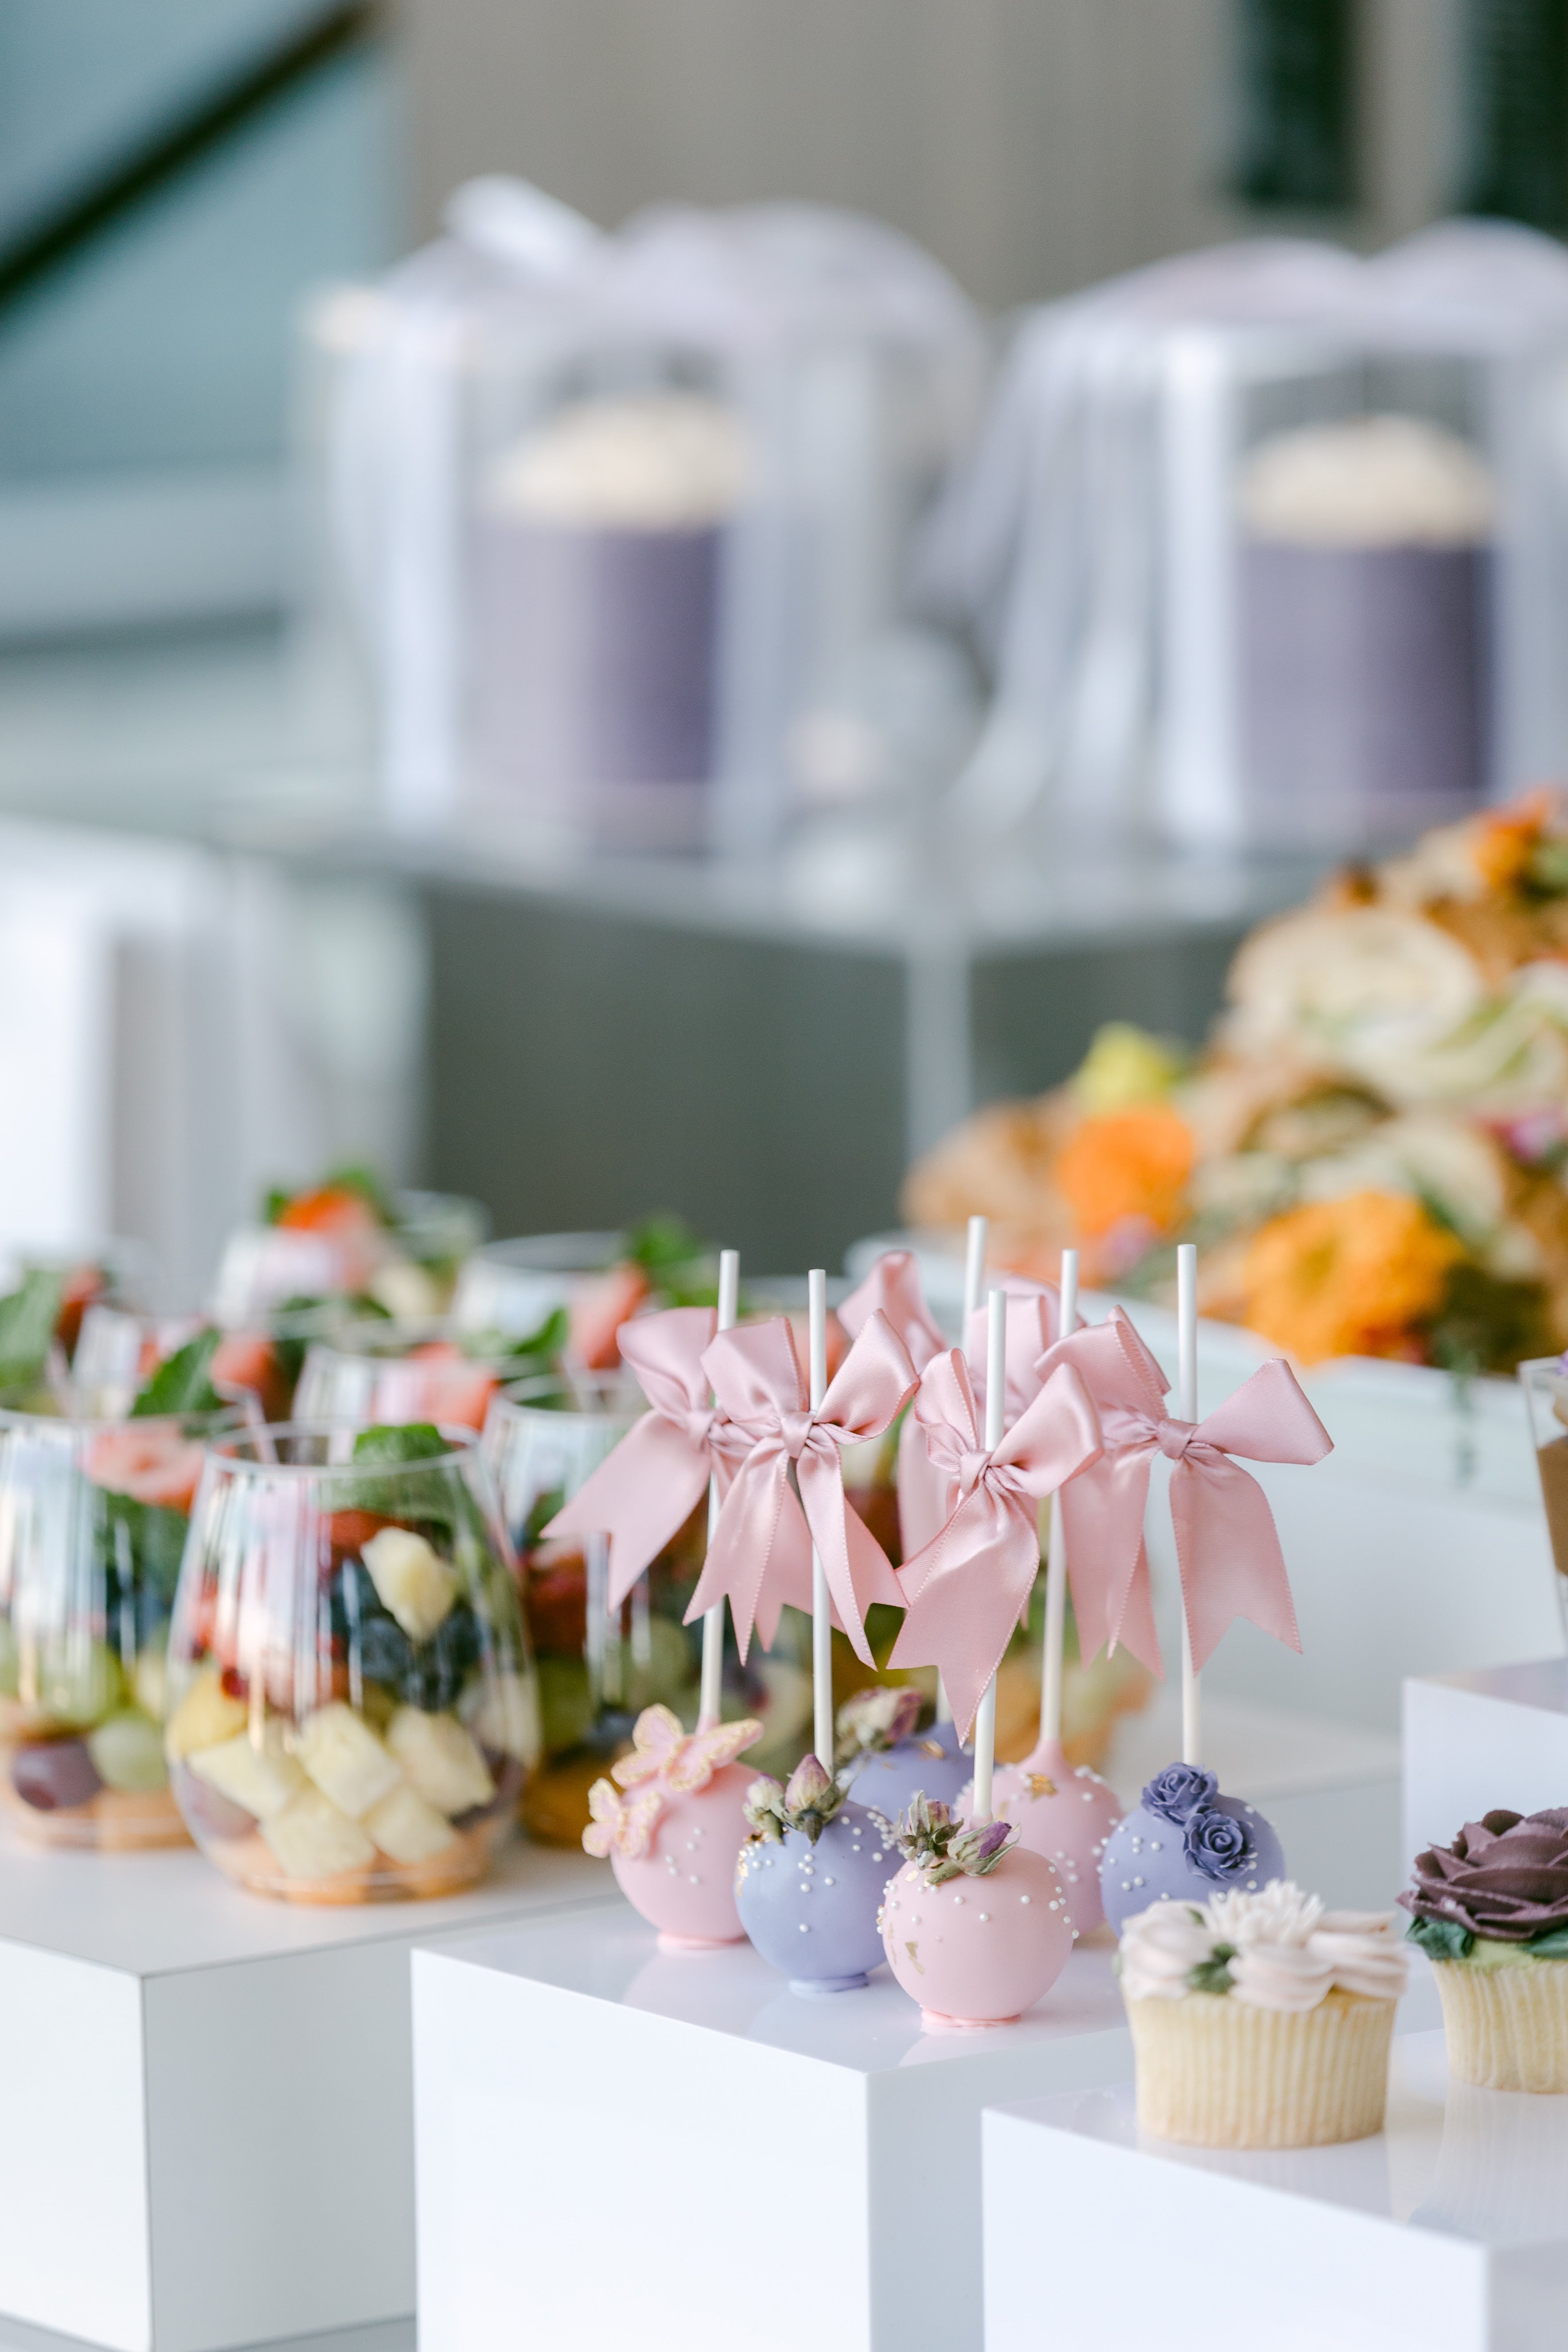 A Taste of Elegance: Luxe Bites redefines Bridal Showers with Culinary Brilliance